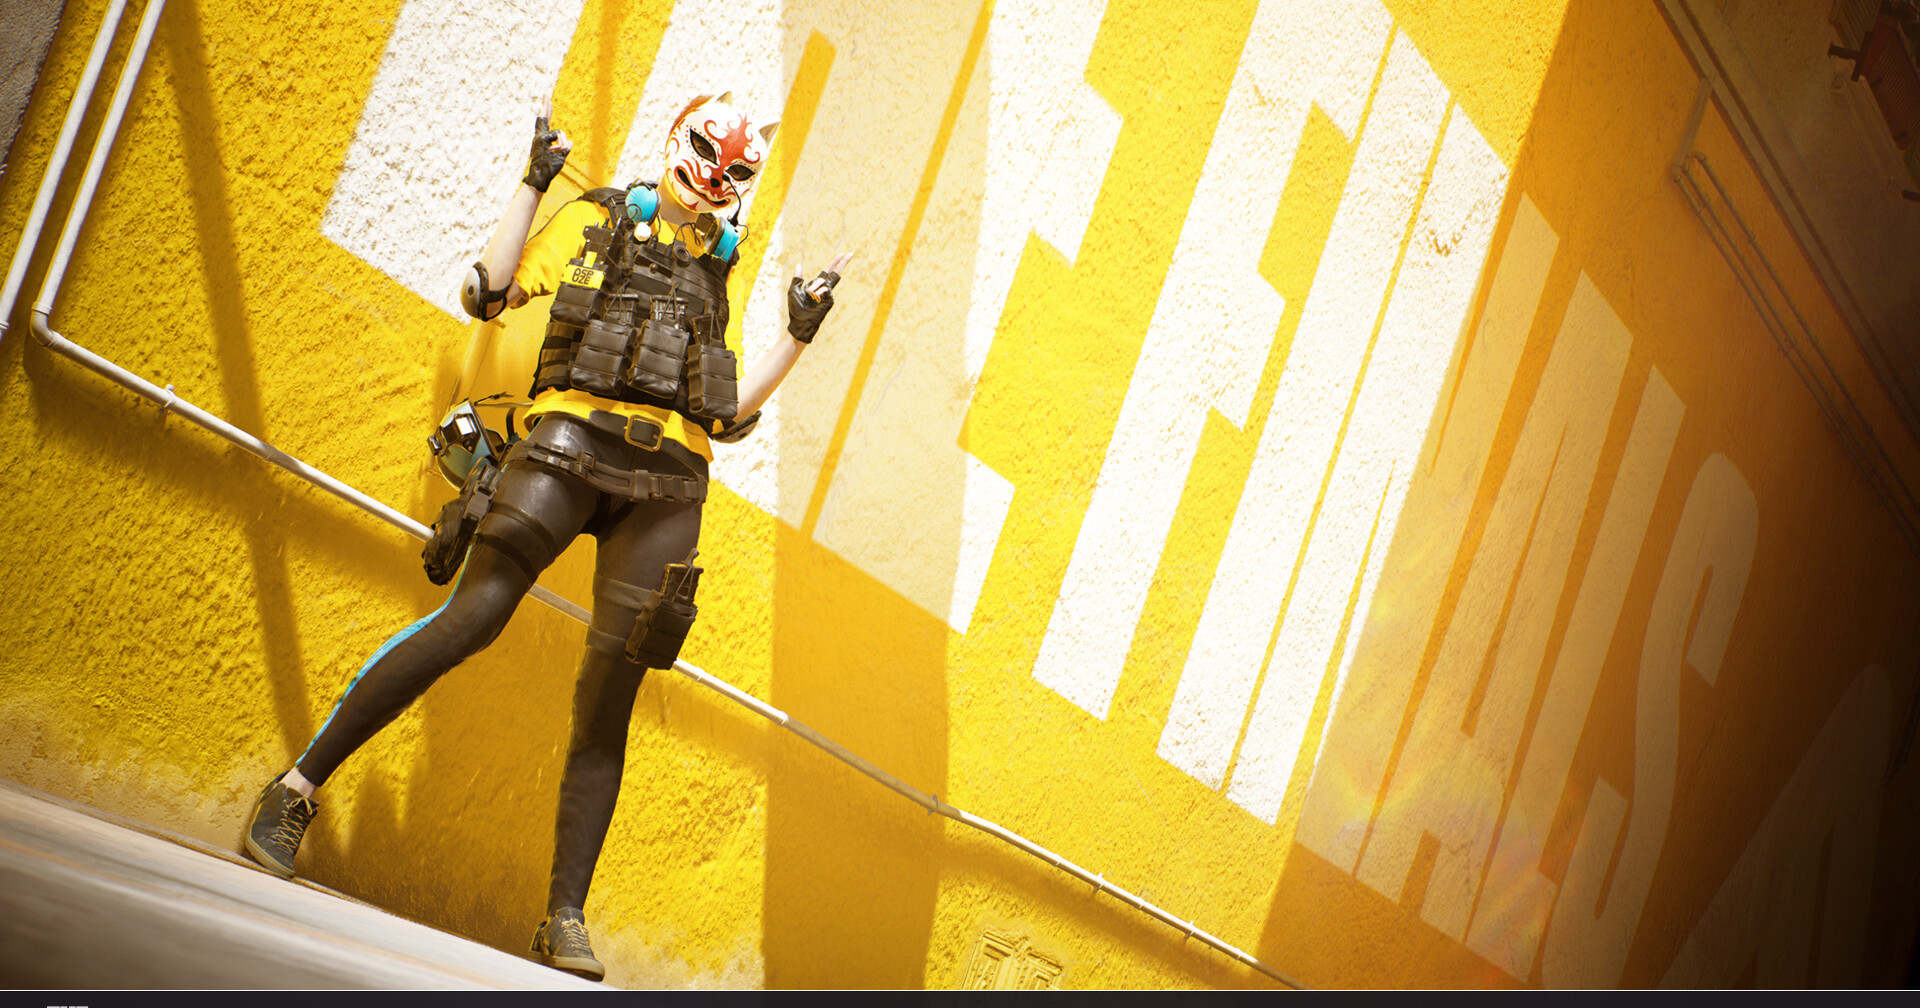 In the playtest of the beta of The Finals, things are getting rough. Here we see a woman wearing a mask on a yellow wall.